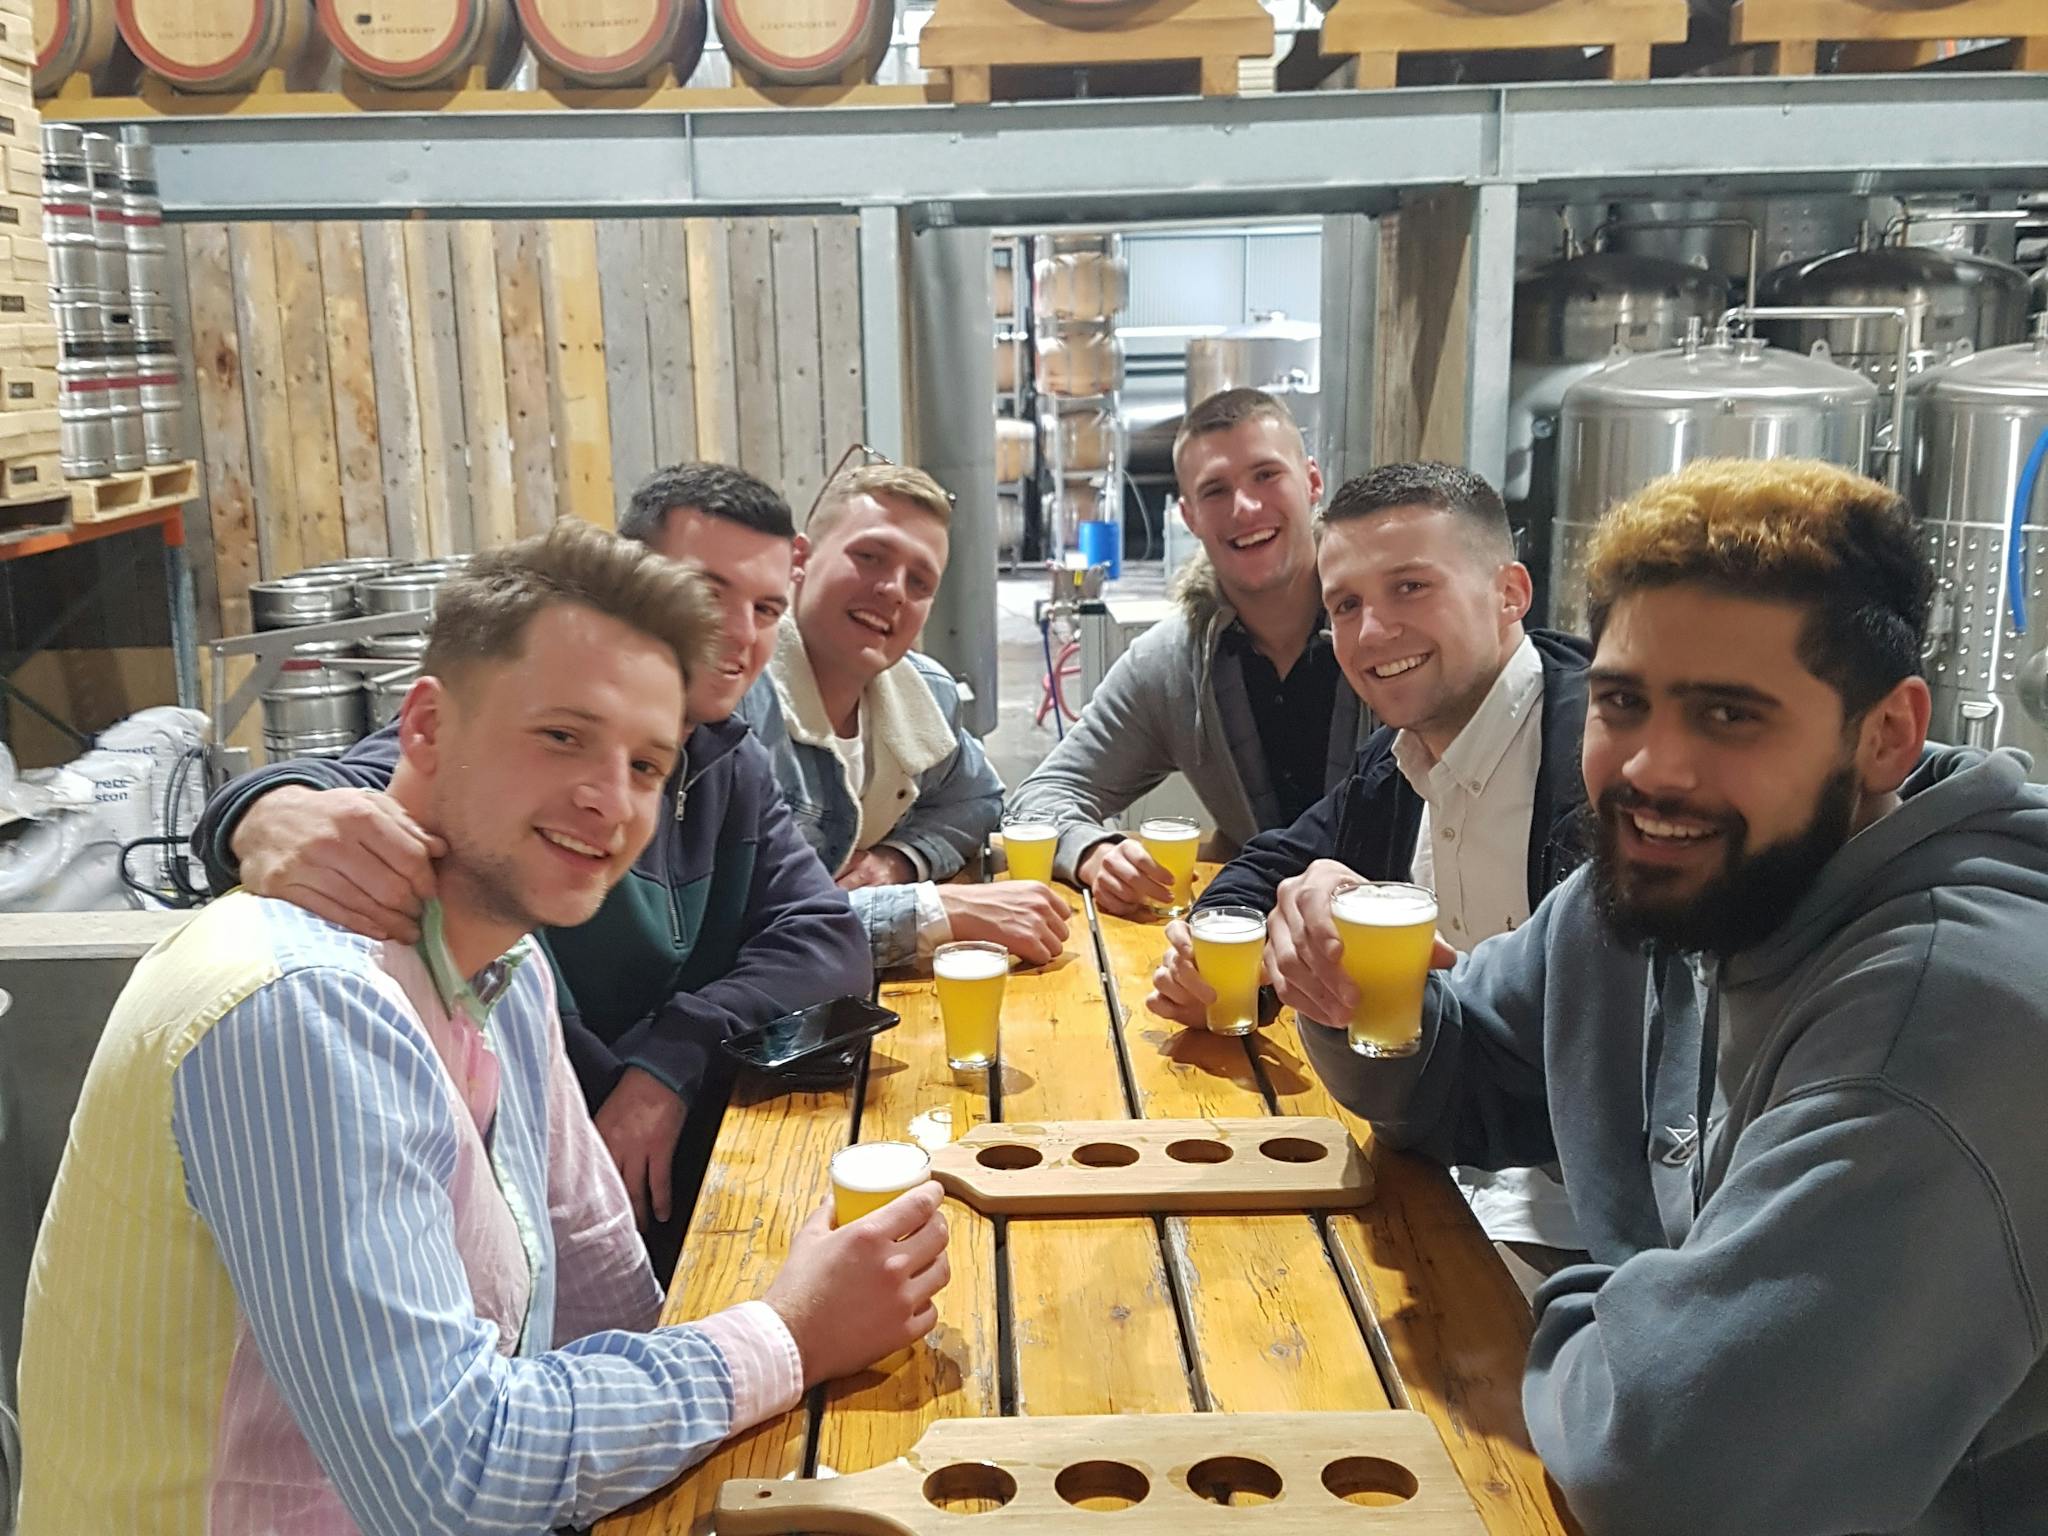 Tasting local craft beers on the Hop hunter Brewery tour